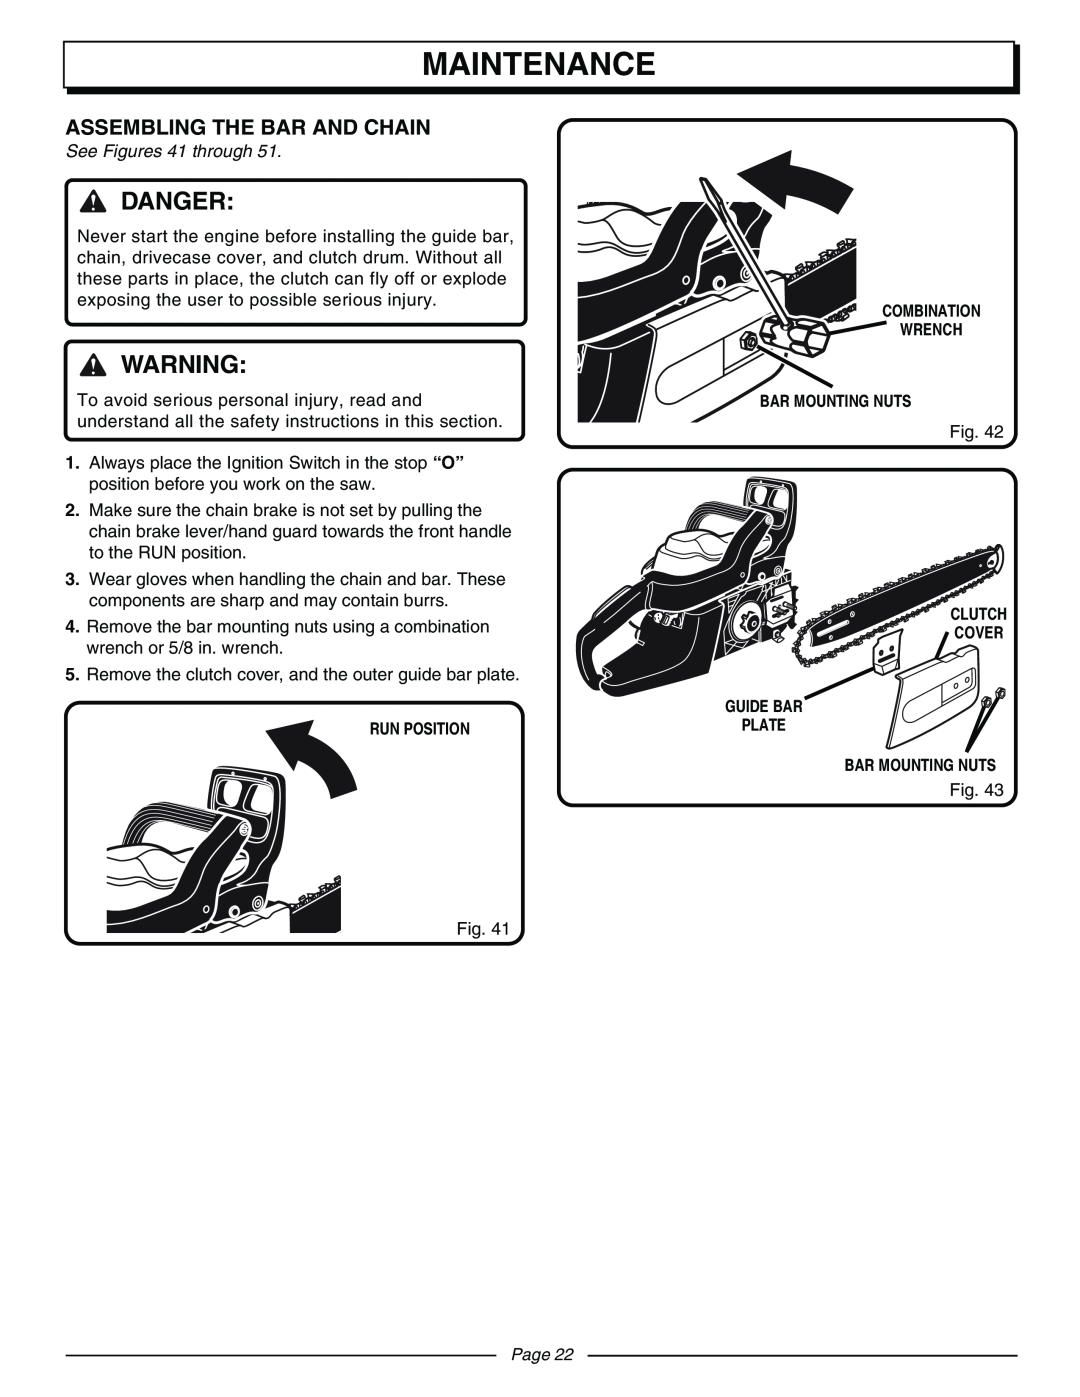 Homelite UT10942D manual Maintenance, Danger, Assembling The Bar And Chain, See Figures 41 through, Page 